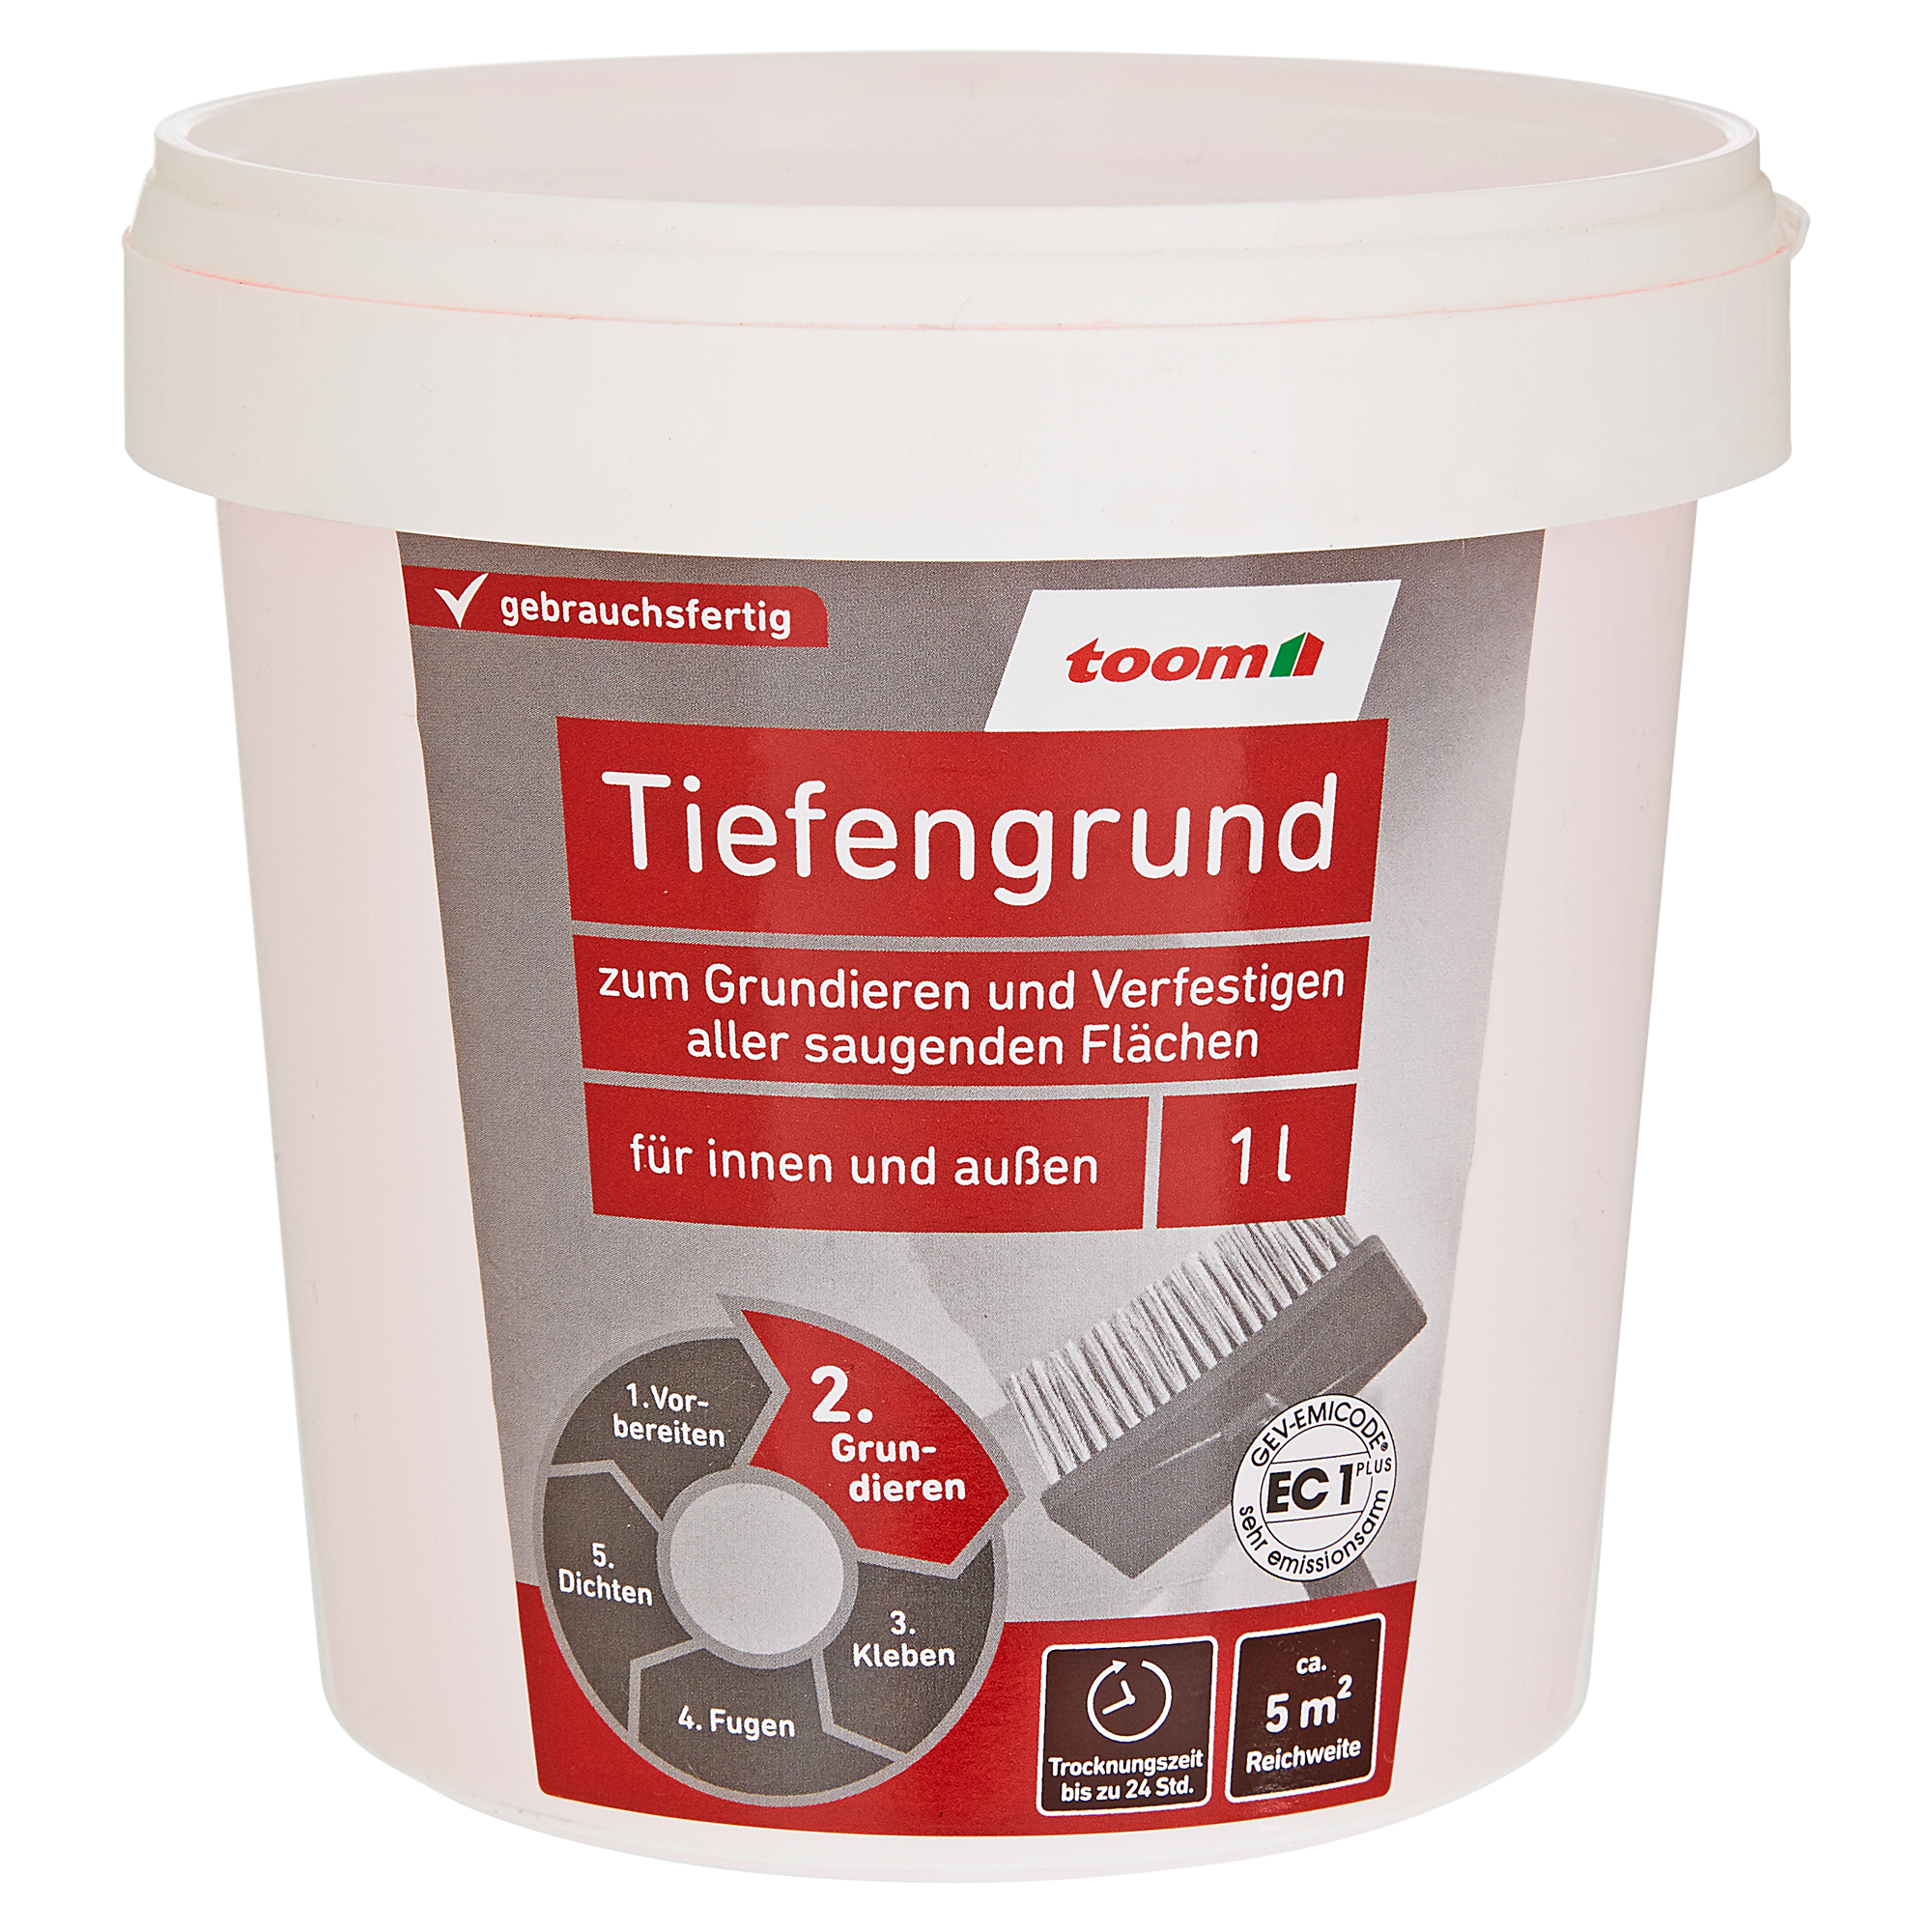 Tiefengrund 1 l + product picture